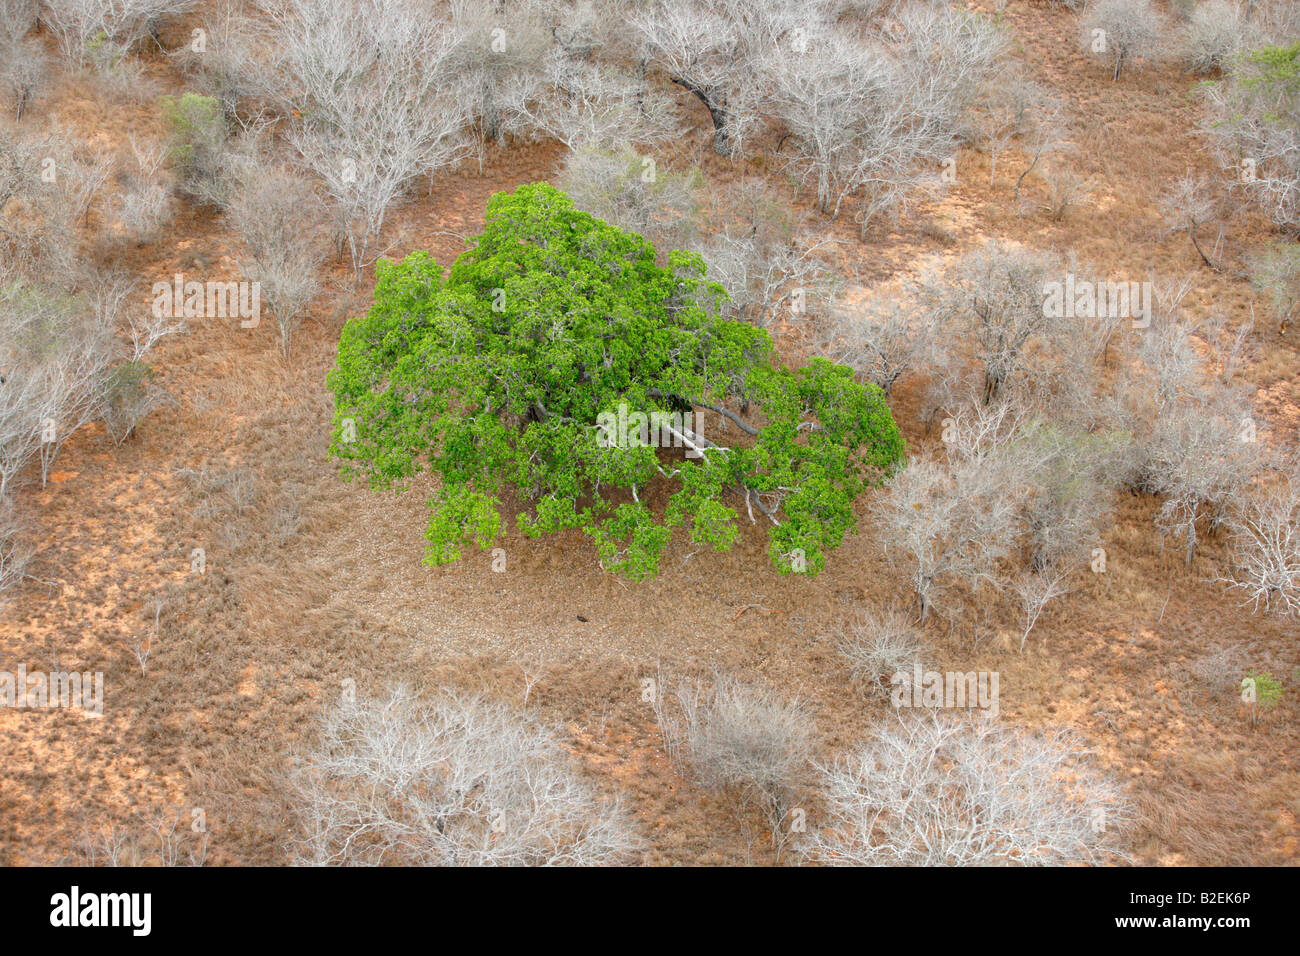 Aerial view of a Baobab (Adansonia digitata) tree in full leaf viewed from above in an otherwise dry woodland Stock Photo